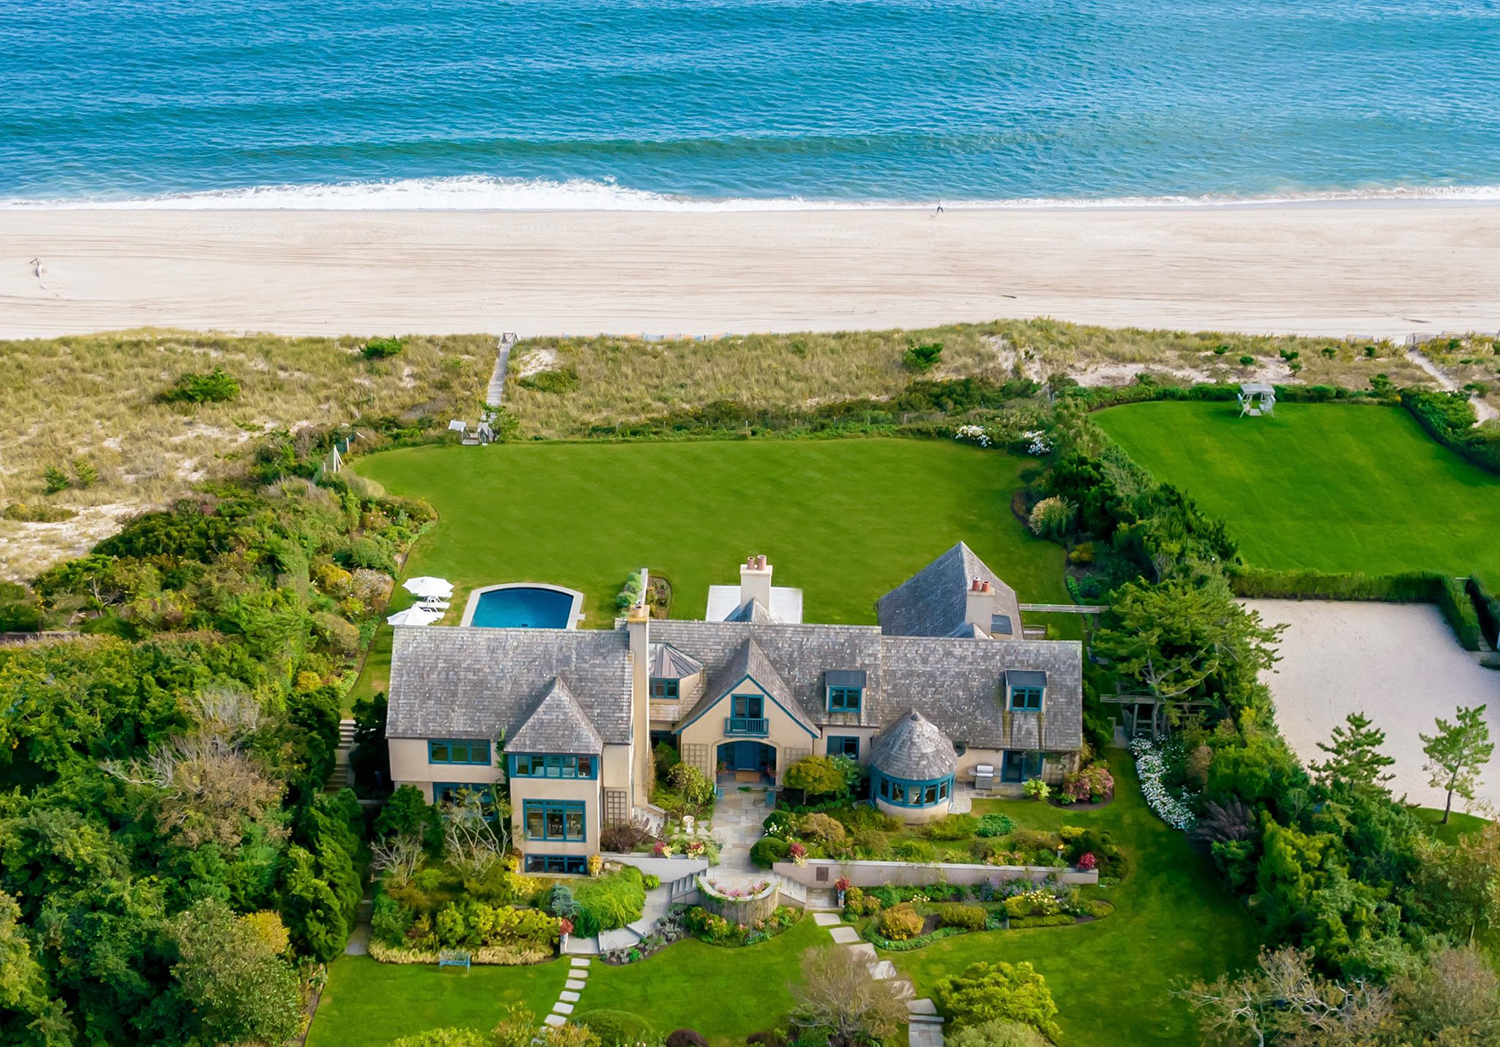 The oceanfront property at 51 West End Road in East Hampton recently sold for $39.5 million. RISE MEDIA/COURTESY DOUGLAS ELLIMAN REALTY